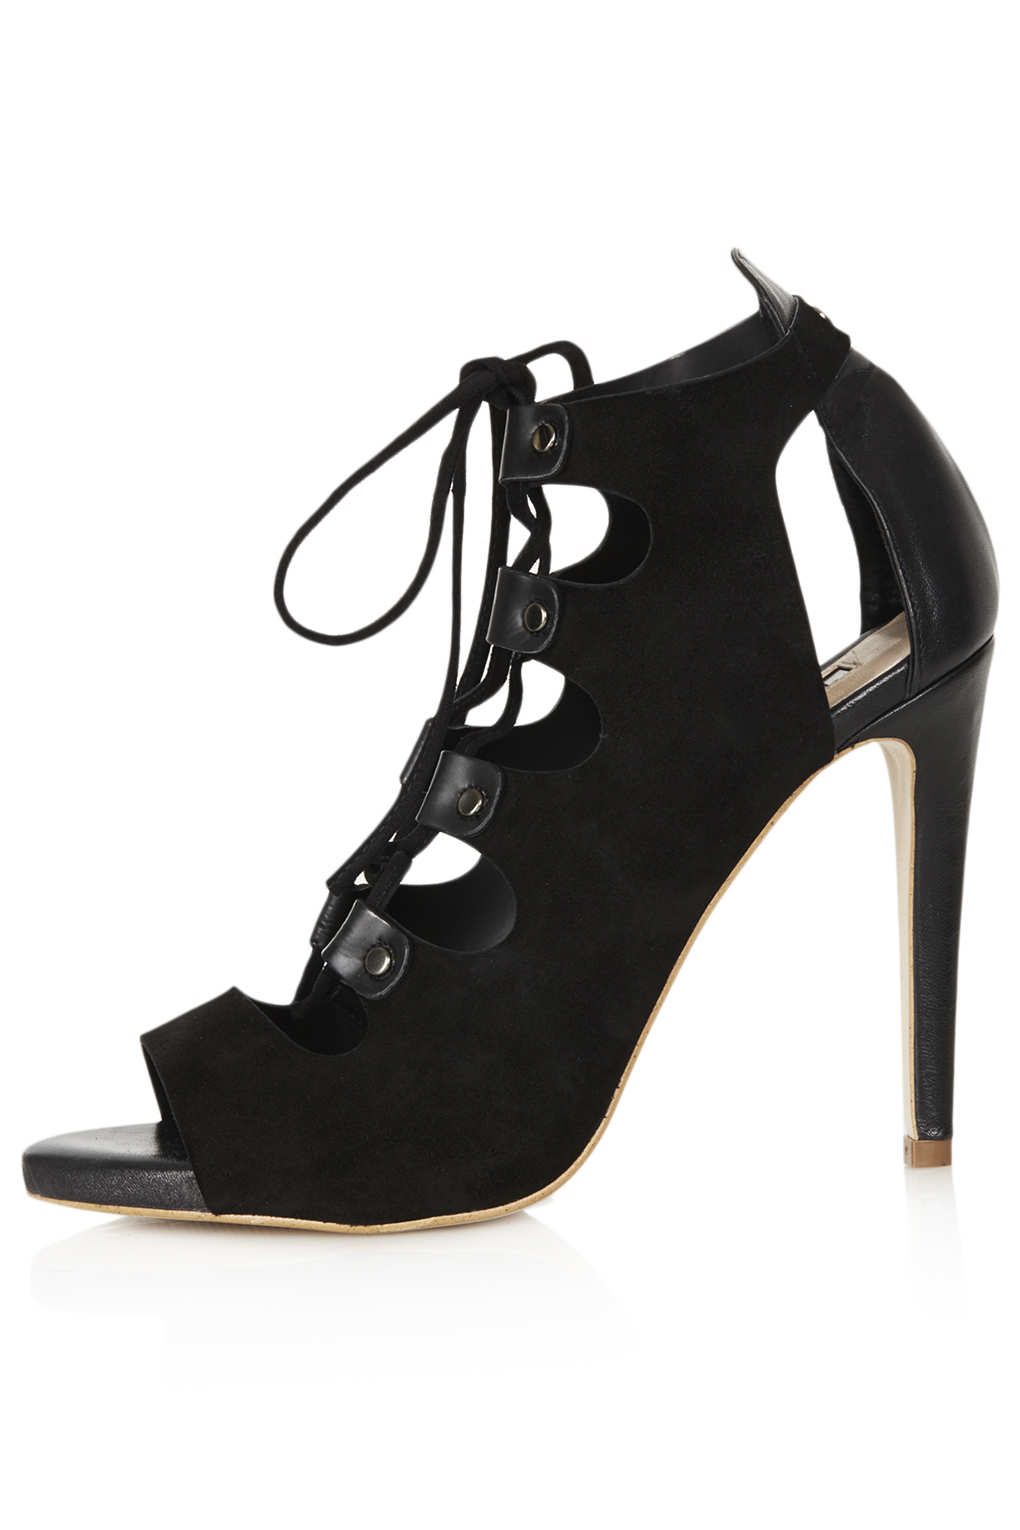 Topshop Gala Lace Up Cut Out Ghillie Shoes in Black | Lyst